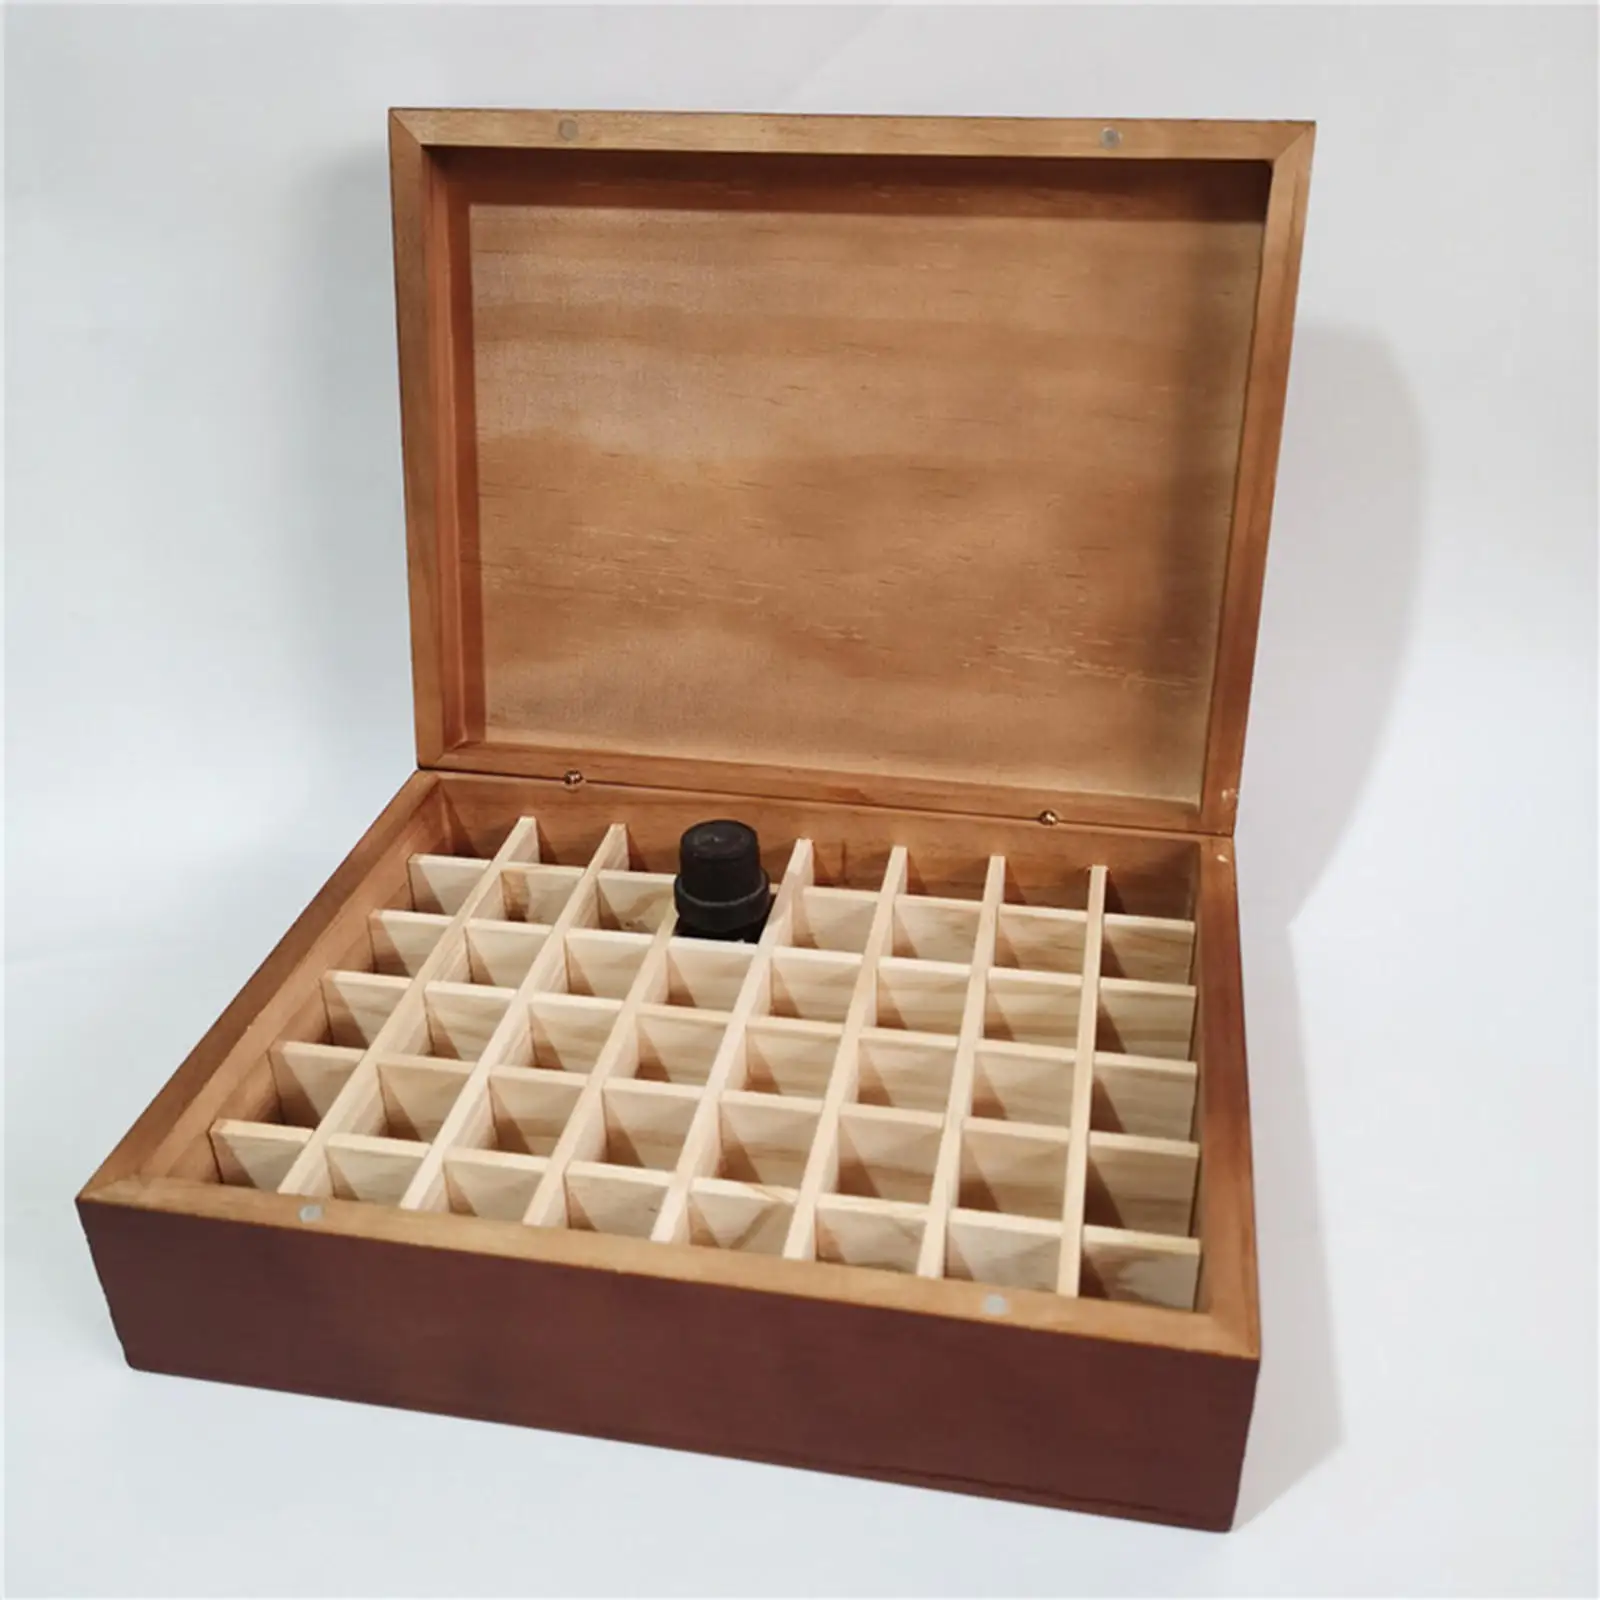 Essential Oil Storage Holder 48 Slots 5ml Display Lightweight Compact Wooden Aromatherapy Oil Container Cases Wooden Exhibit